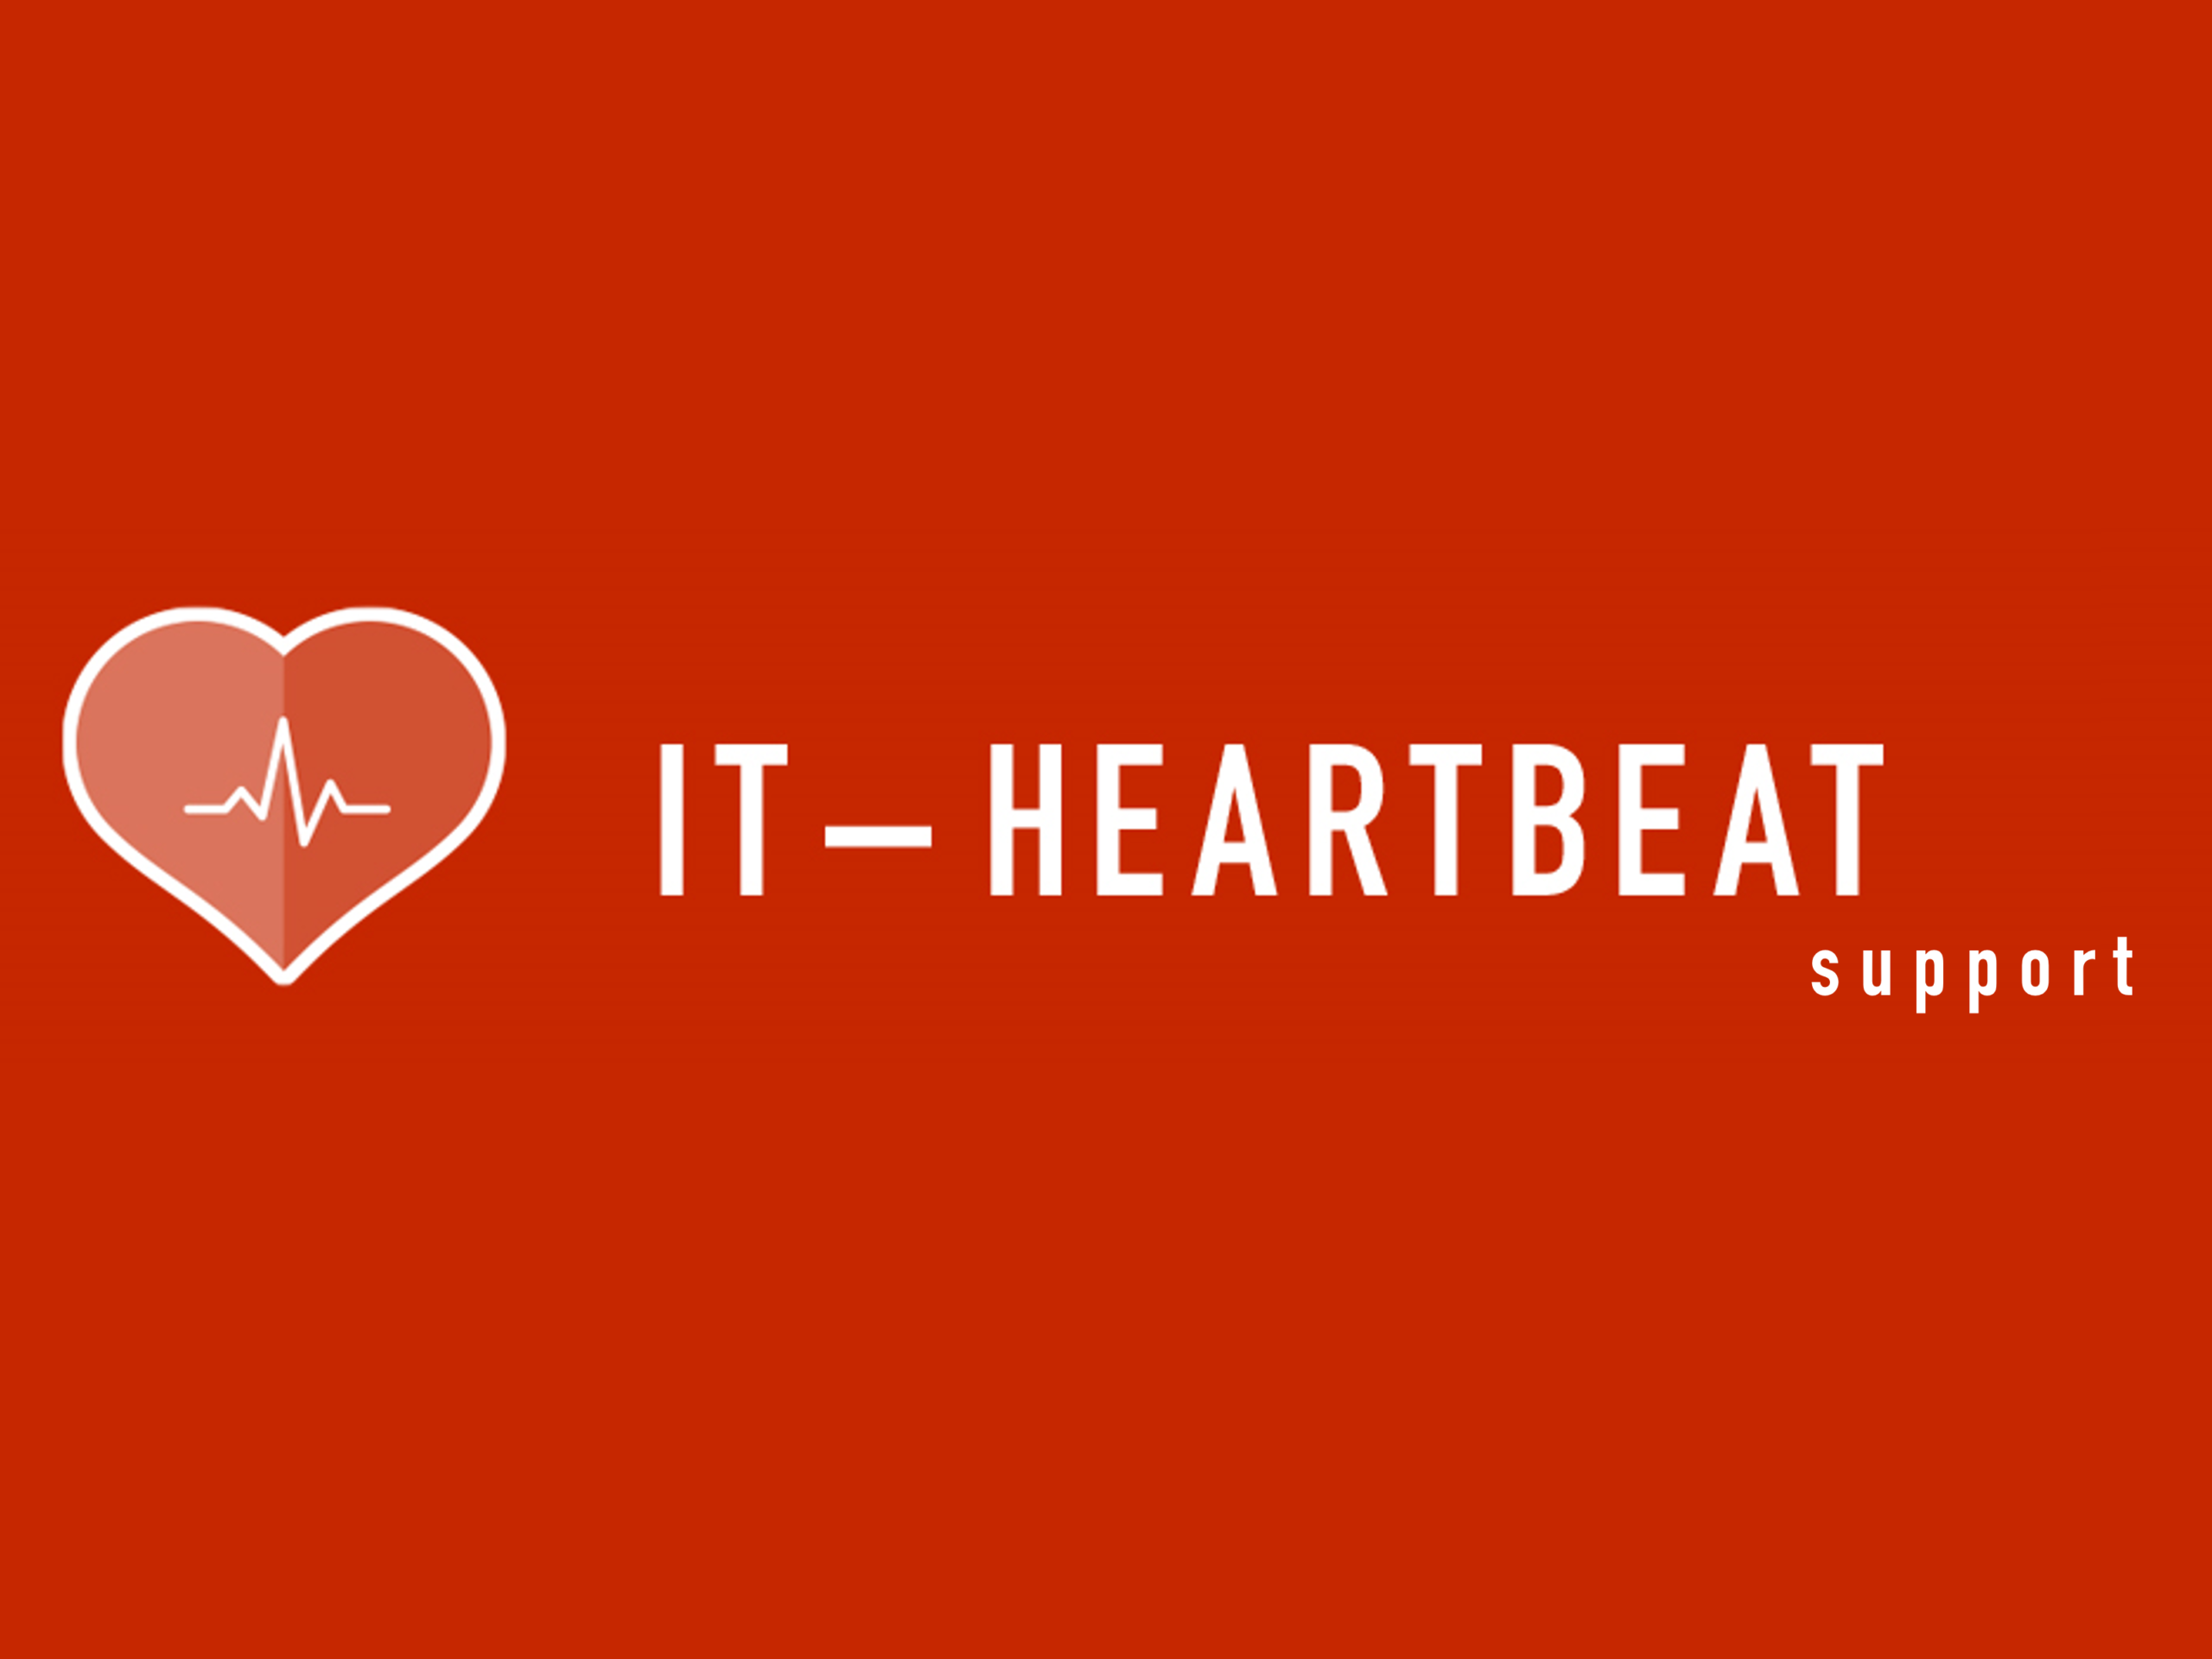 Service Picture IT-HEARTBEAT support